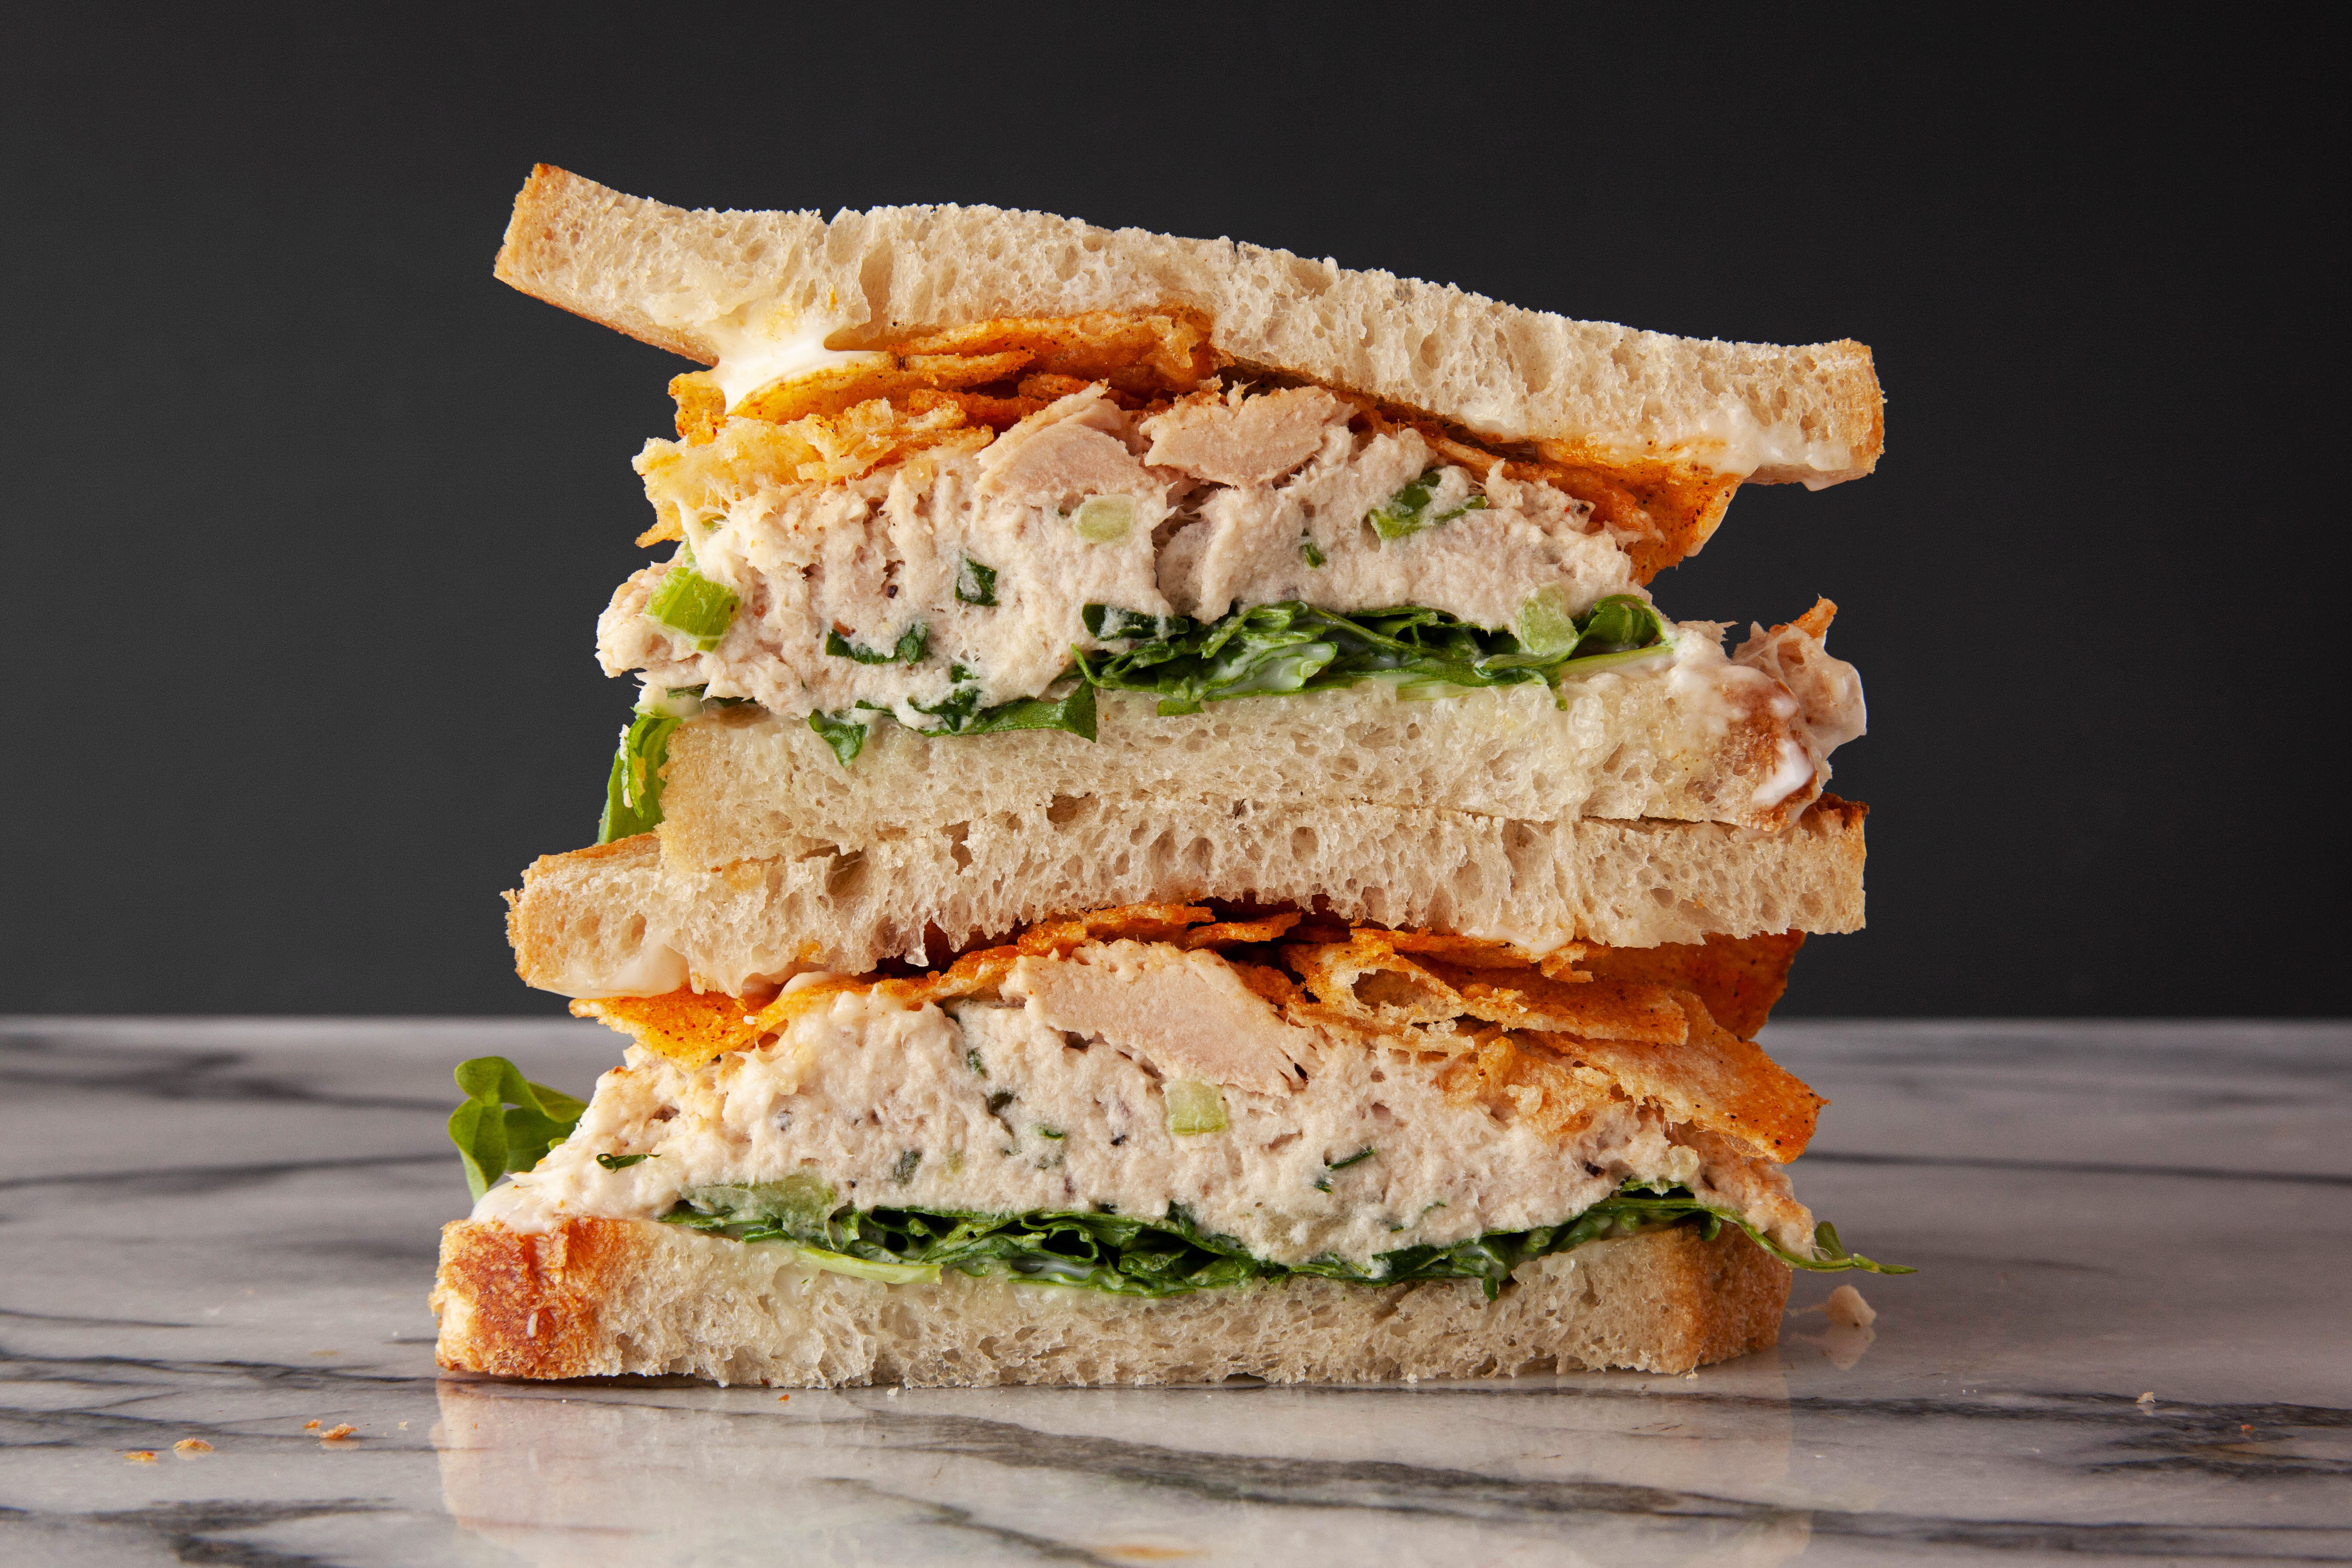 Two halves of a tuna sandwich stacked on top of each other.